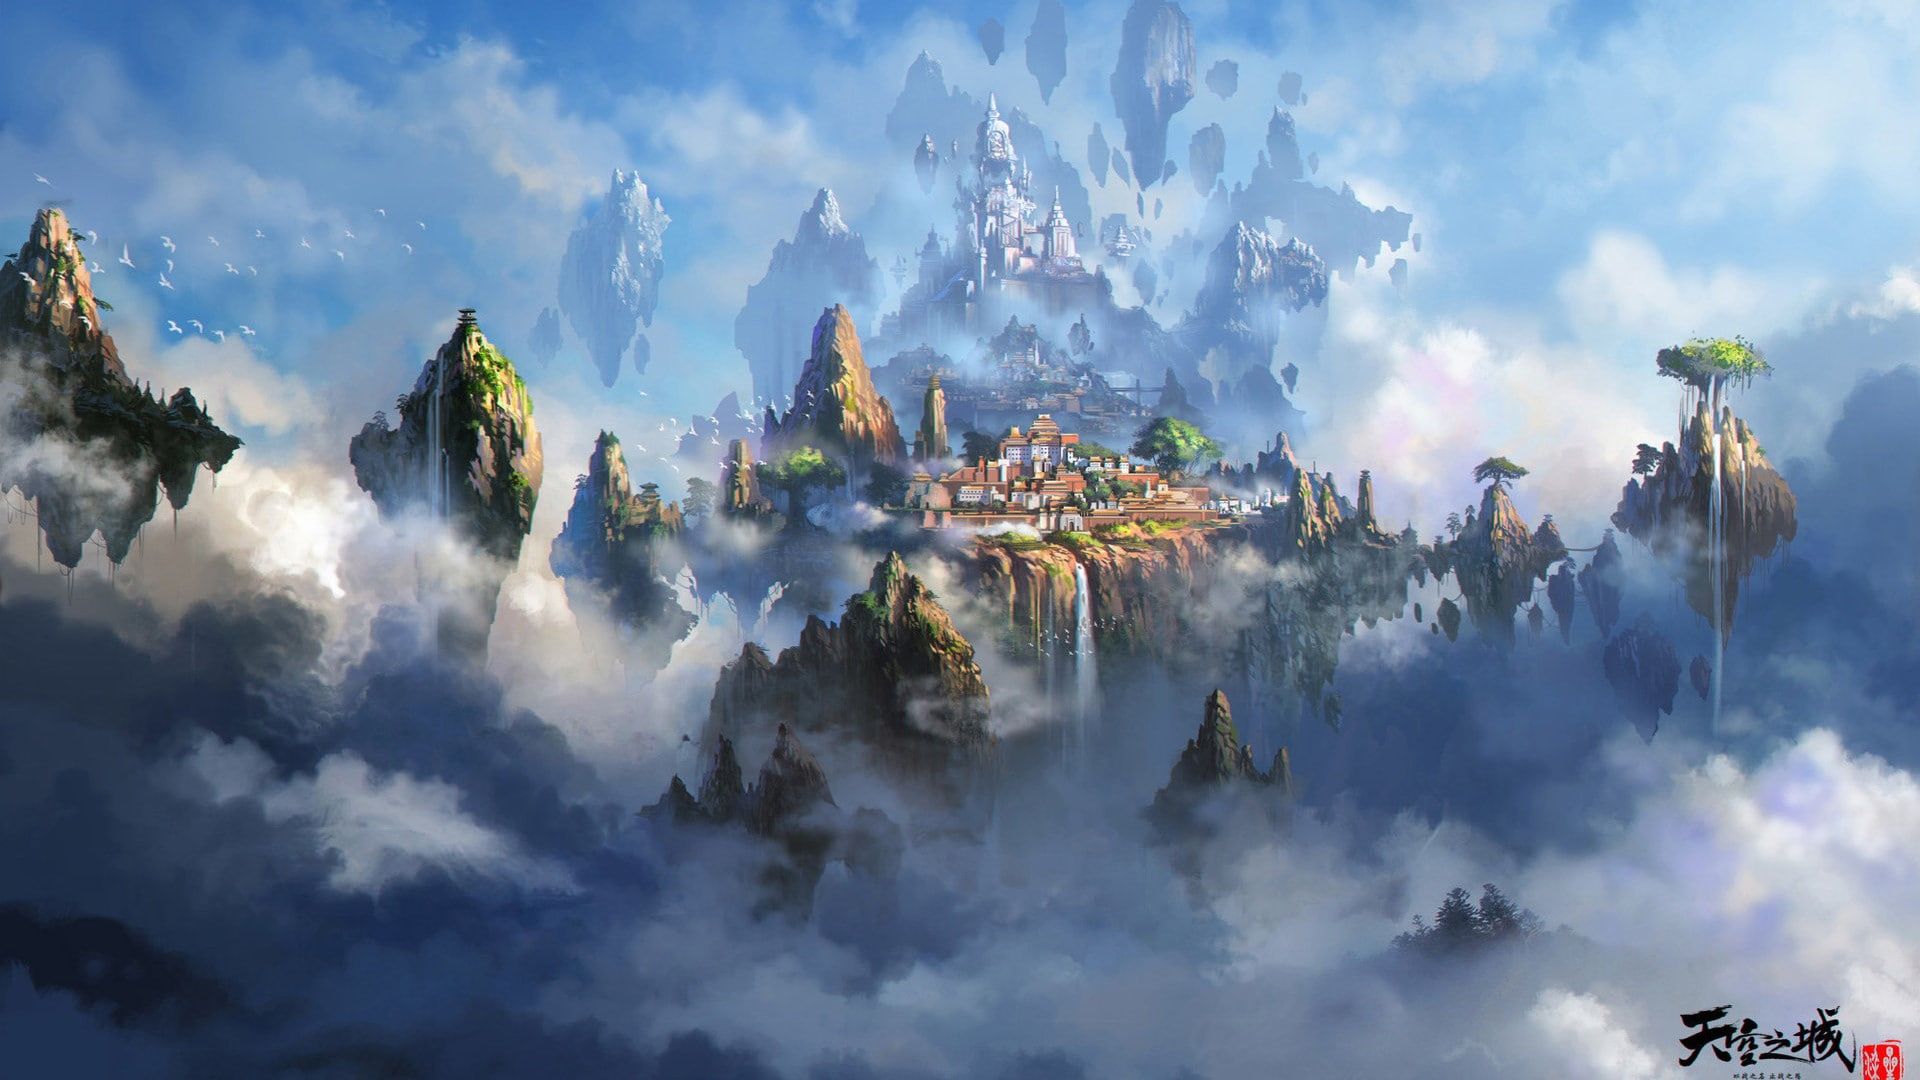 fantasy floating city and mountains 1080P wallpaper hdwallpaper 1920x1080